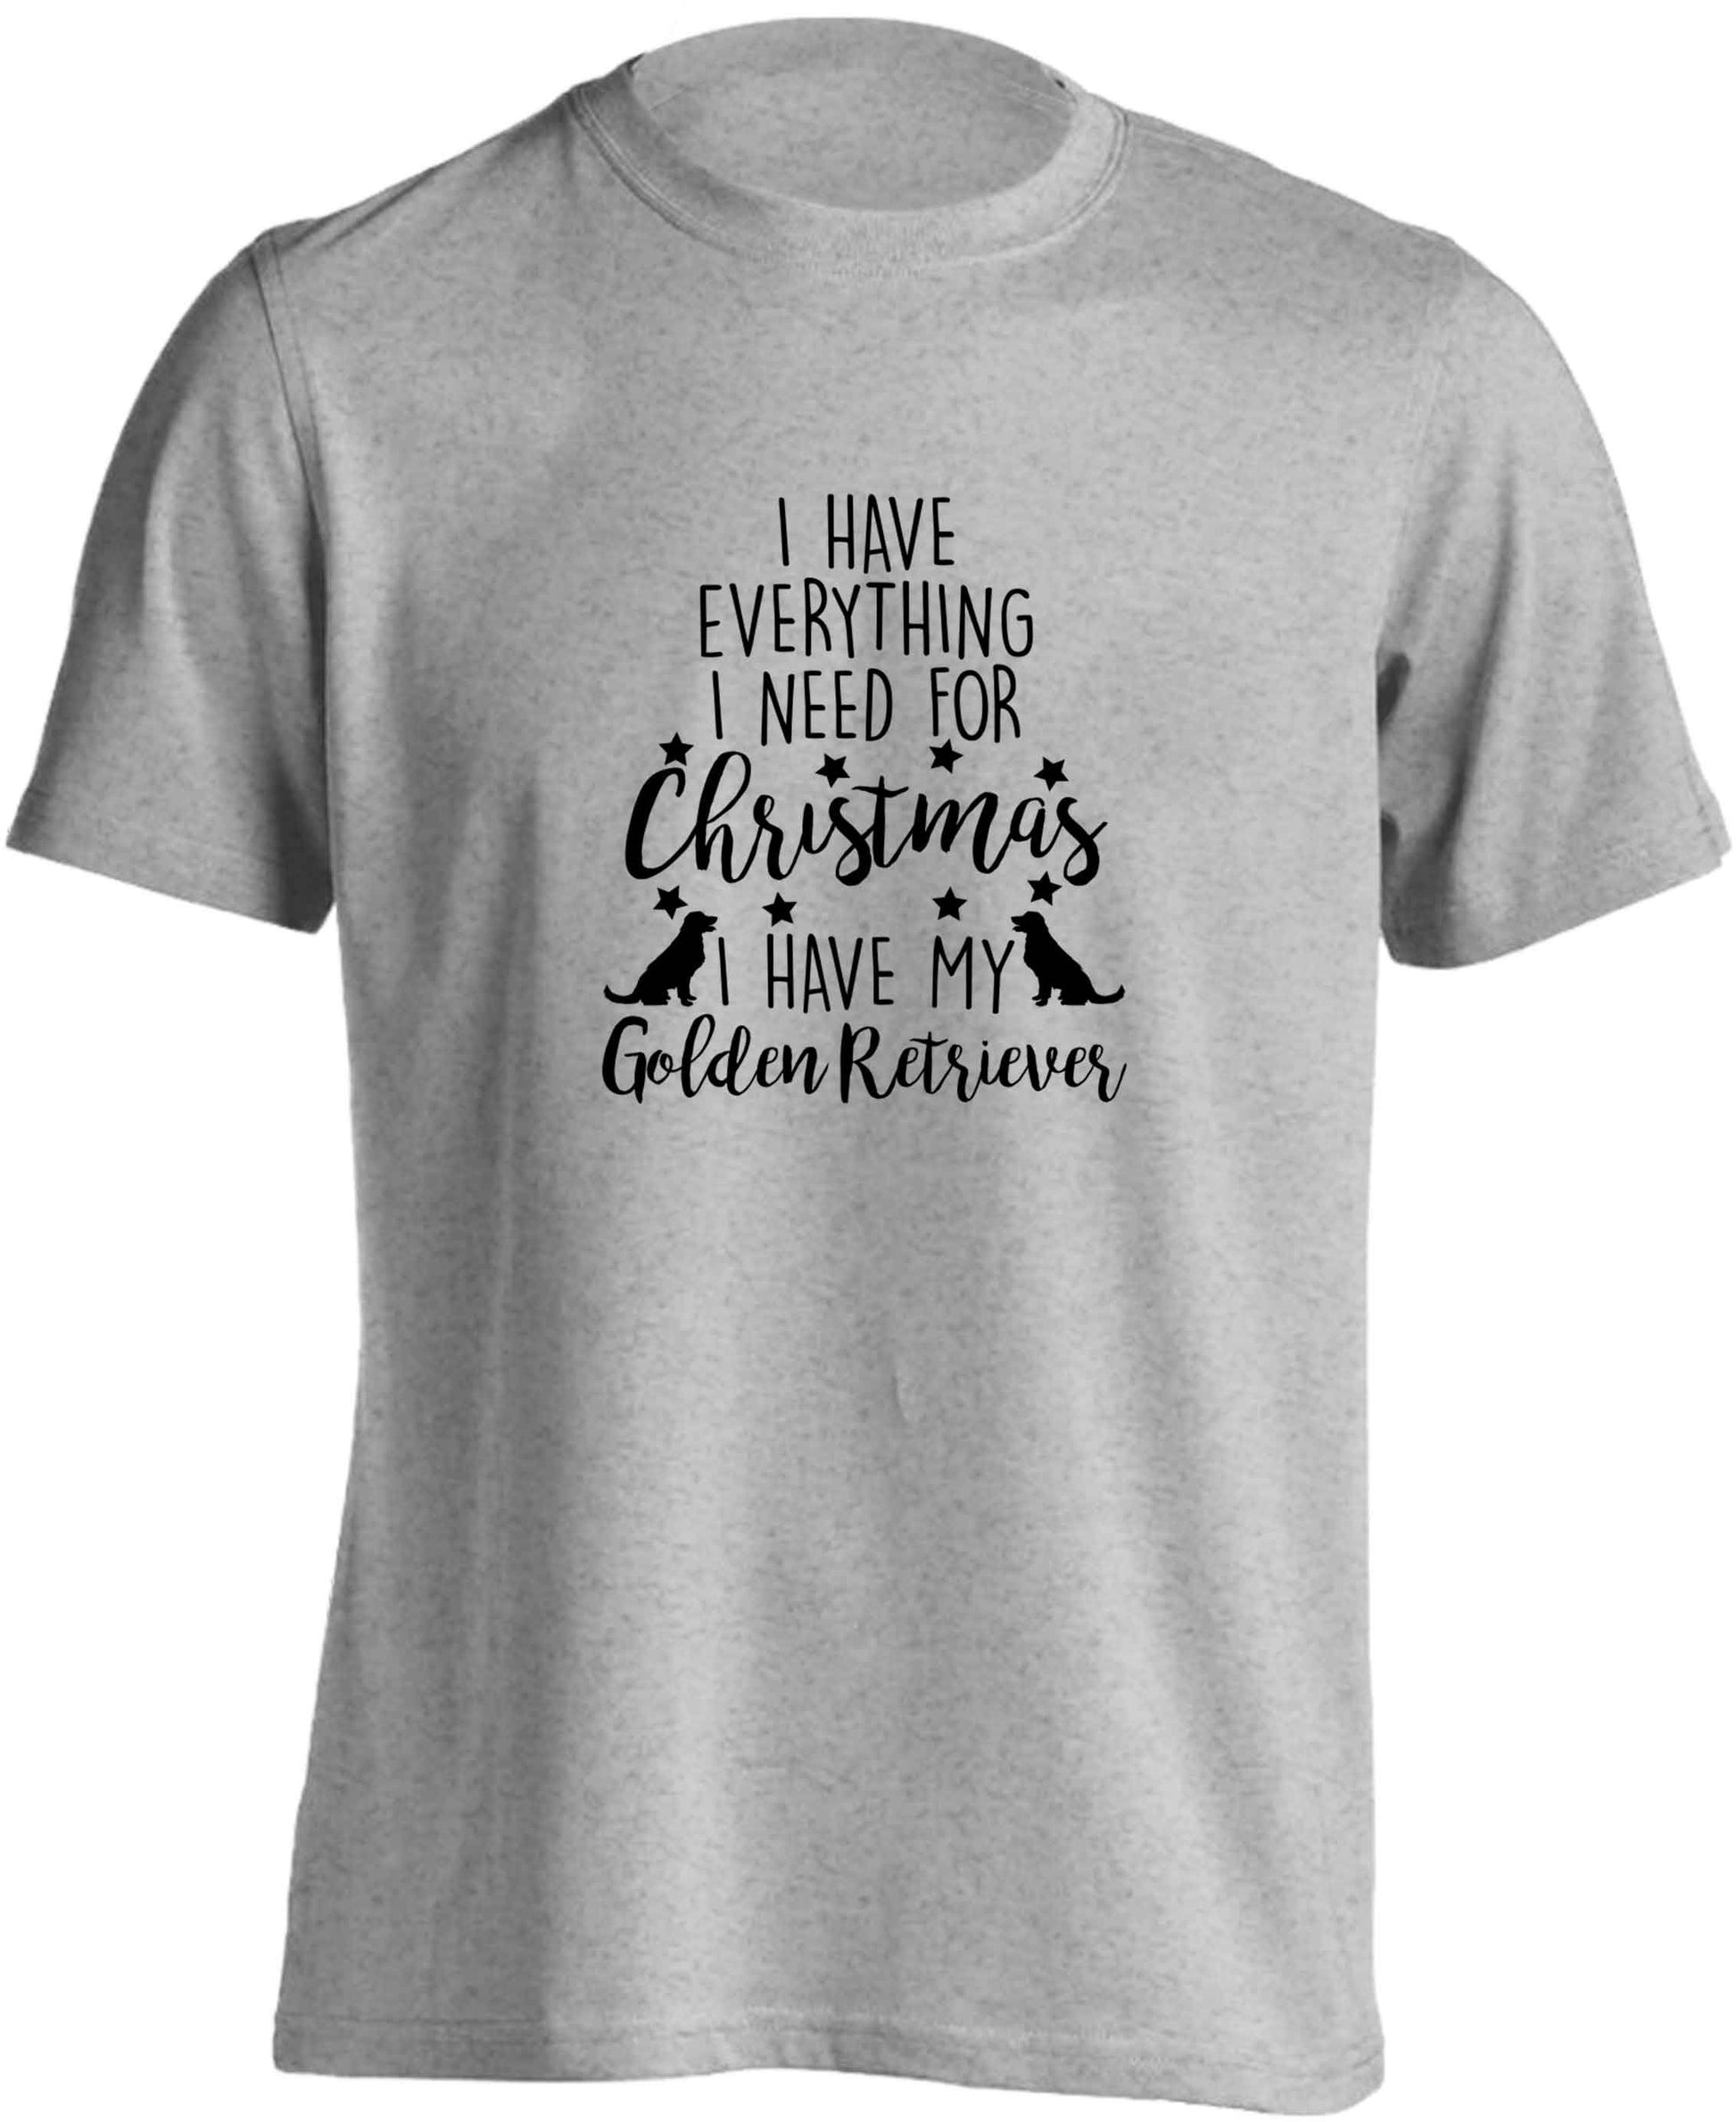 I have everything I need for Christmas I have my golden retriever adults unisex grey Tshirt 2XL